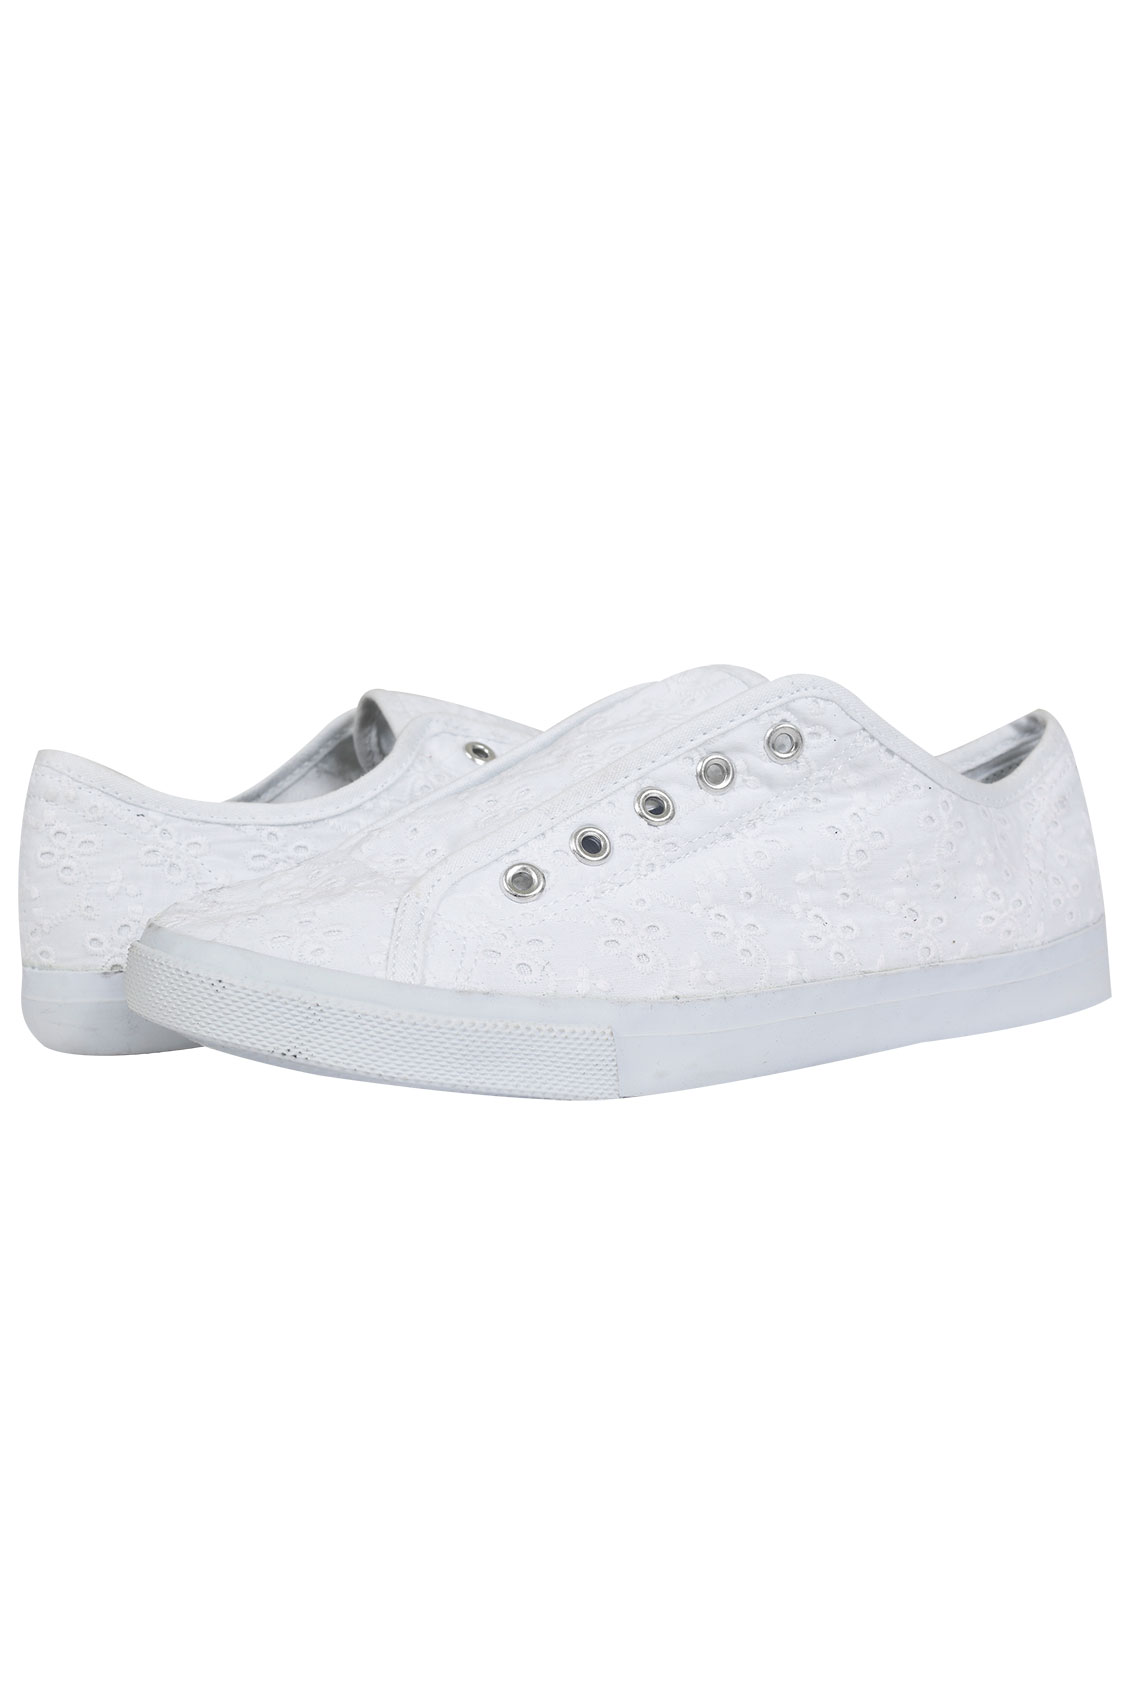 White Floral Embroidered Slip On Canvas Laceless Plimsolls In EEE Fit